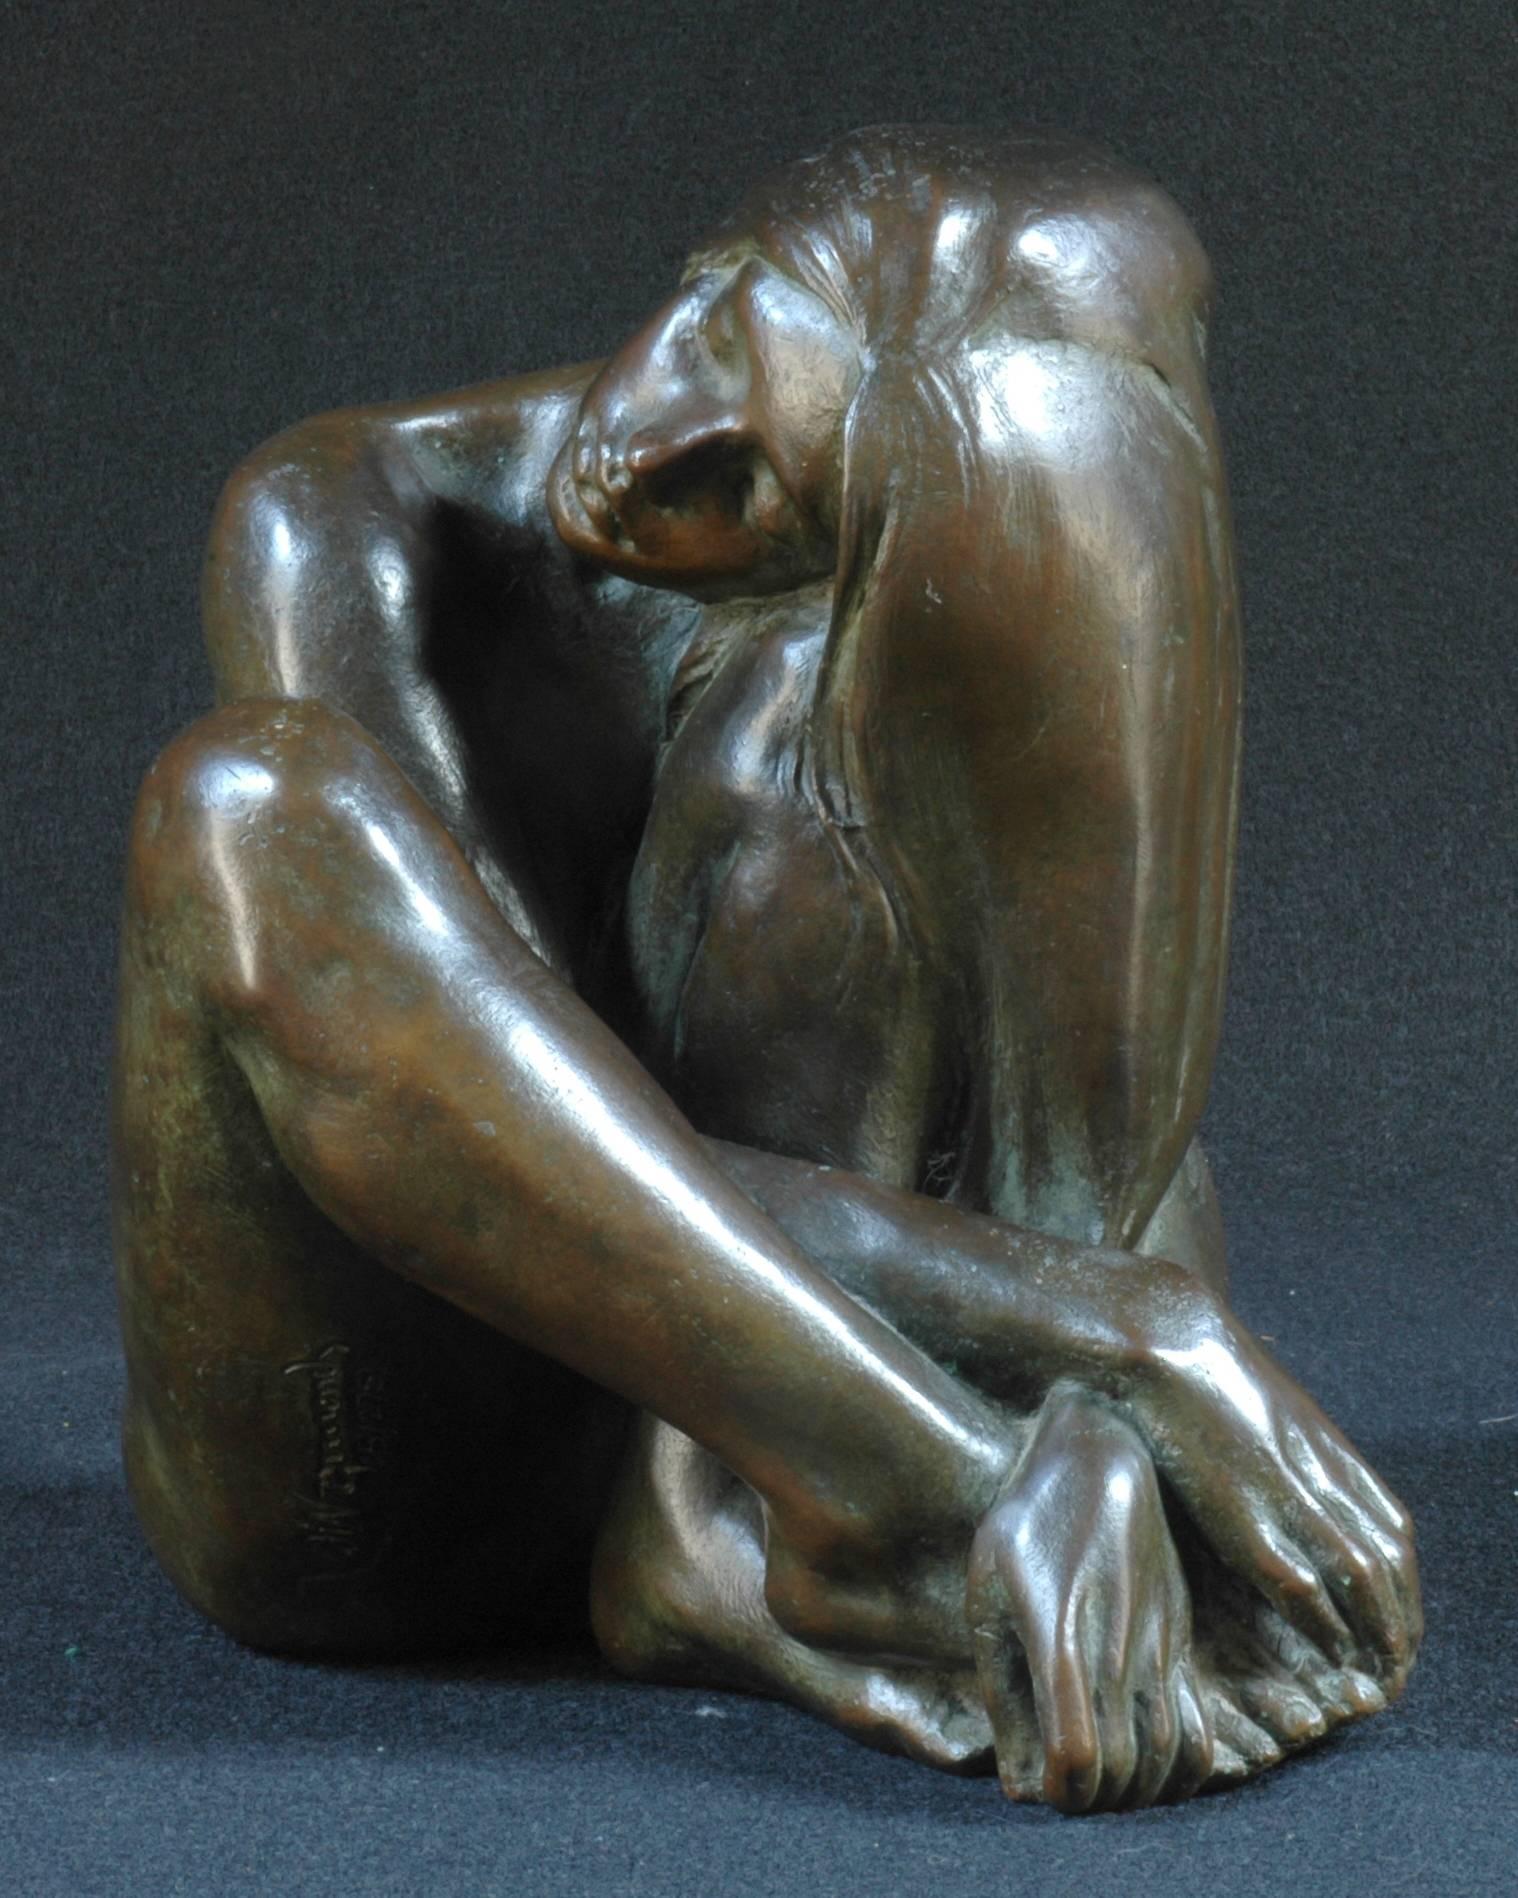 Bronze sculpture of a nude seated young woman with long flowing hair

Signed and numbered 5/275, foundry stamp, dated 1/14/88.